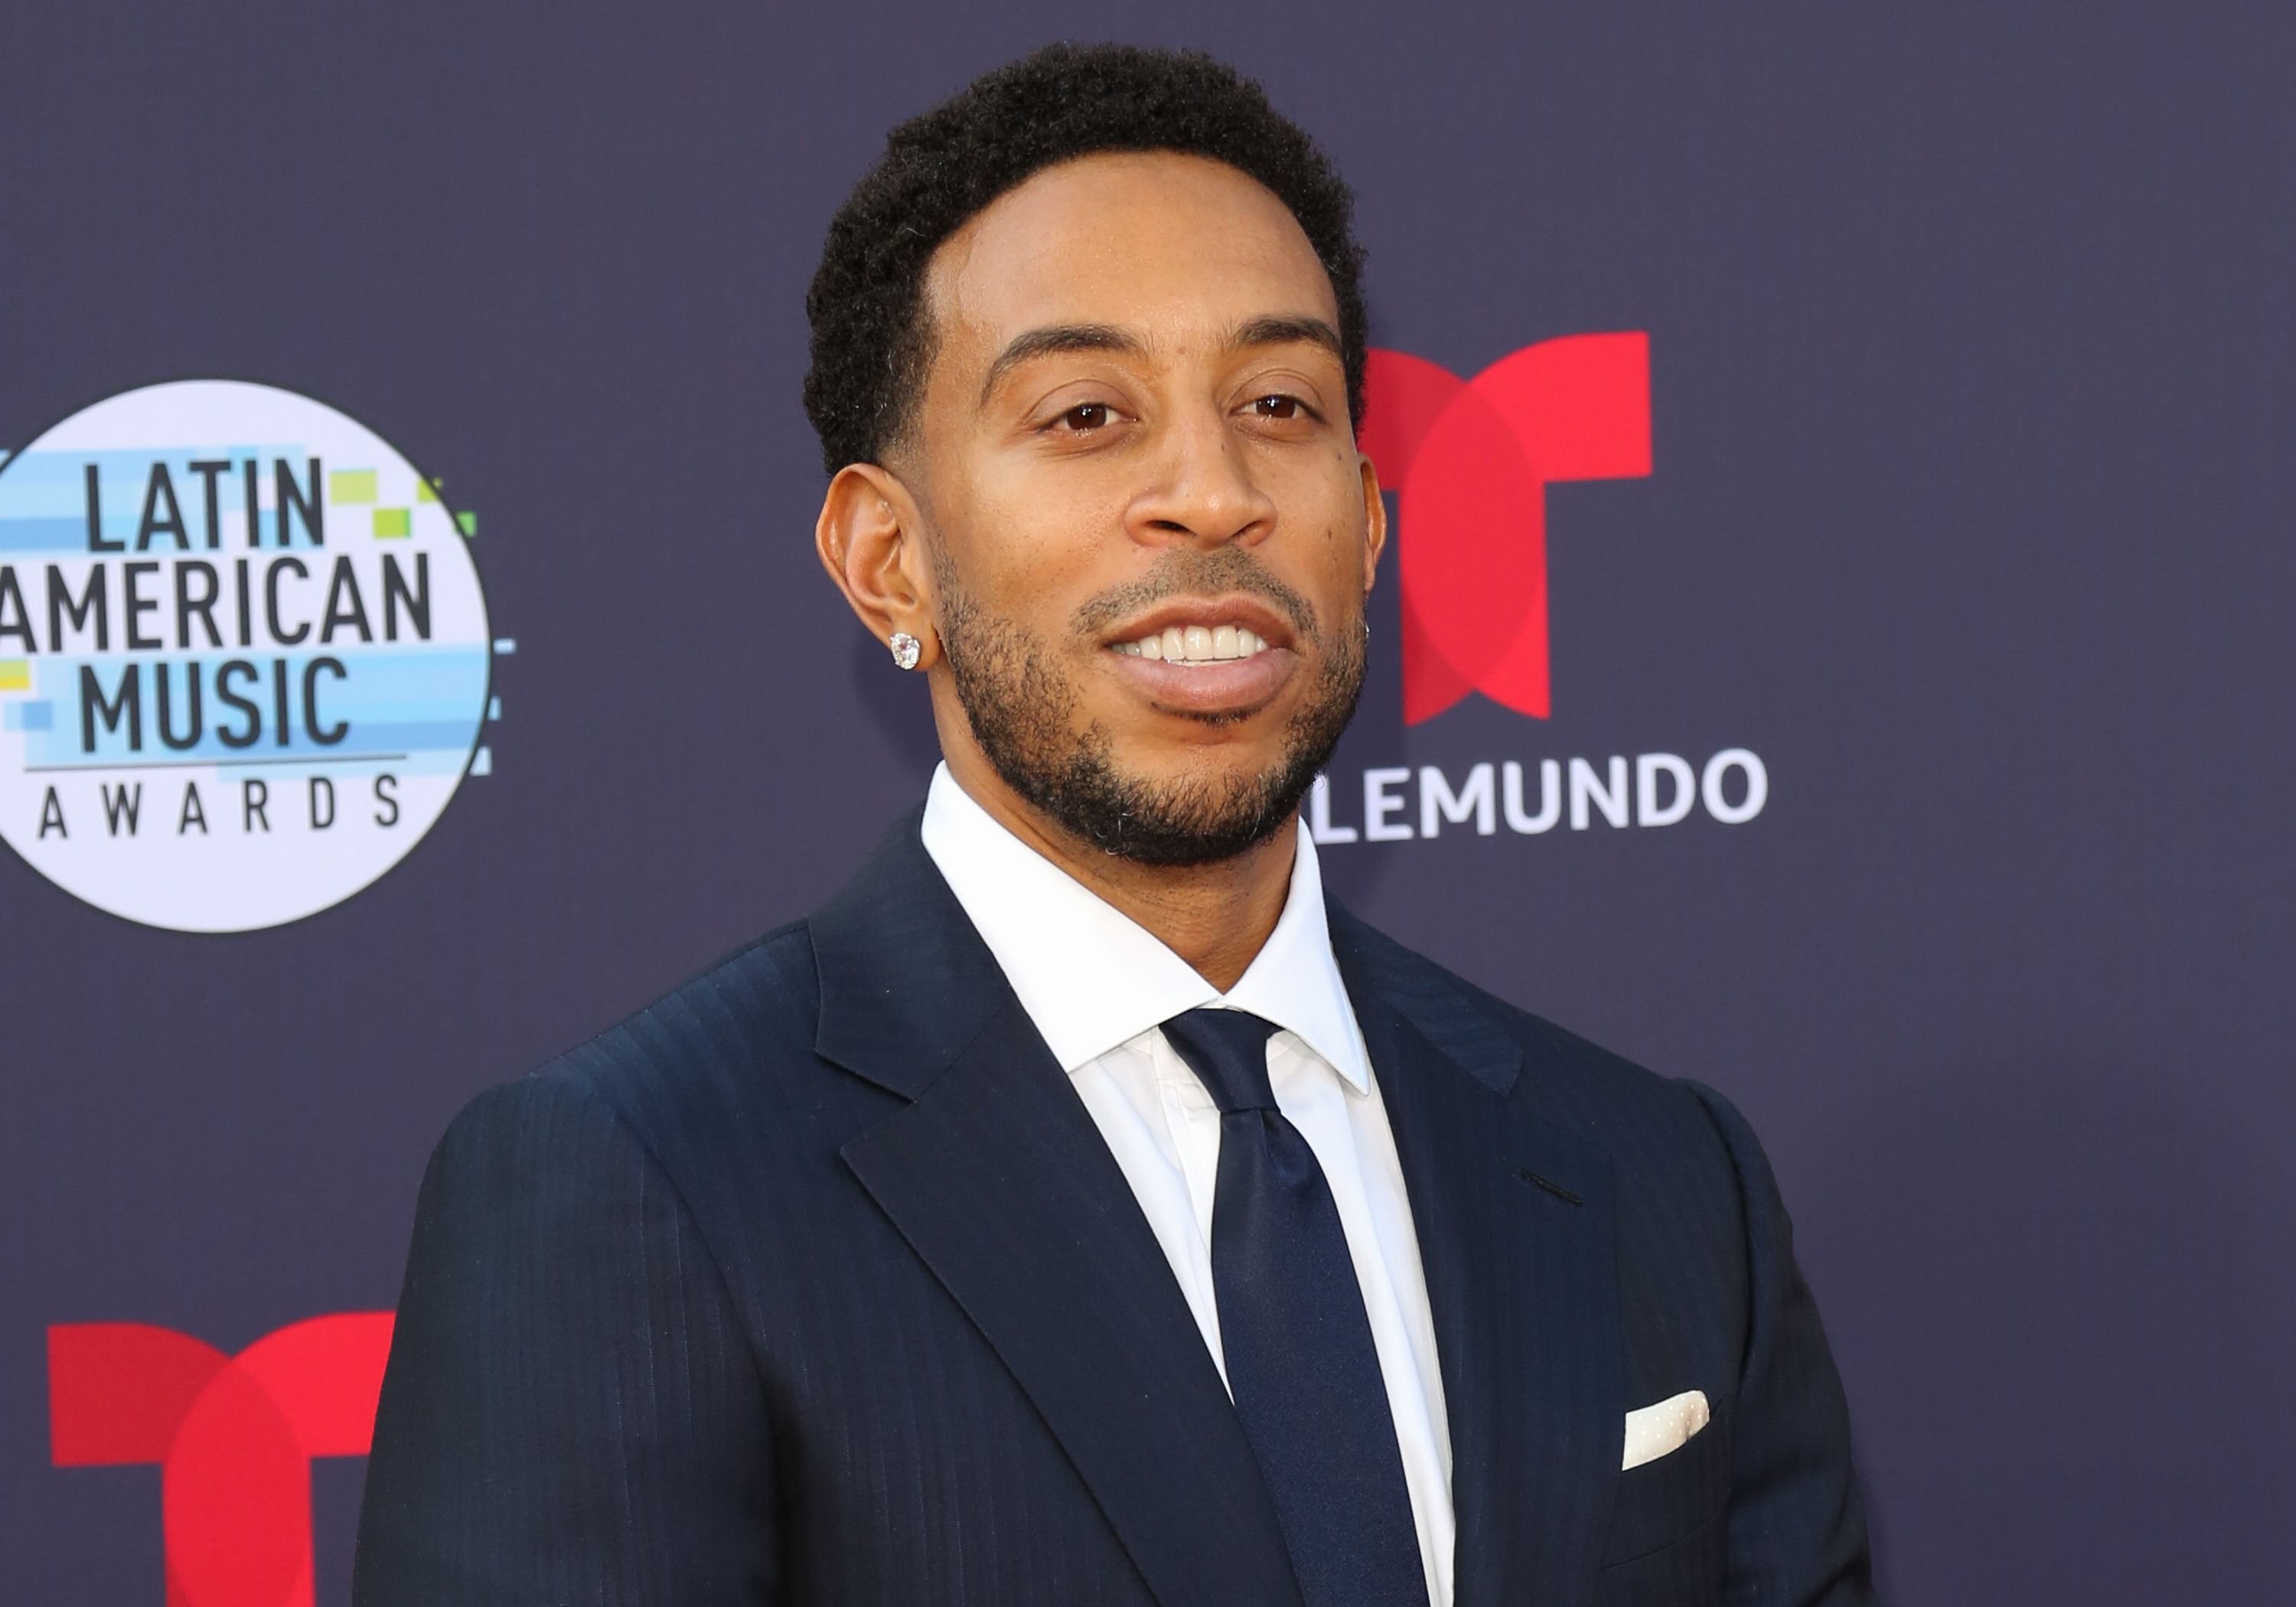 Ludacris at the the 2018 Latin American Music Awards at Dolby Theatre on October 25, 2018 in Hollywood, California. | Source: Getty Images